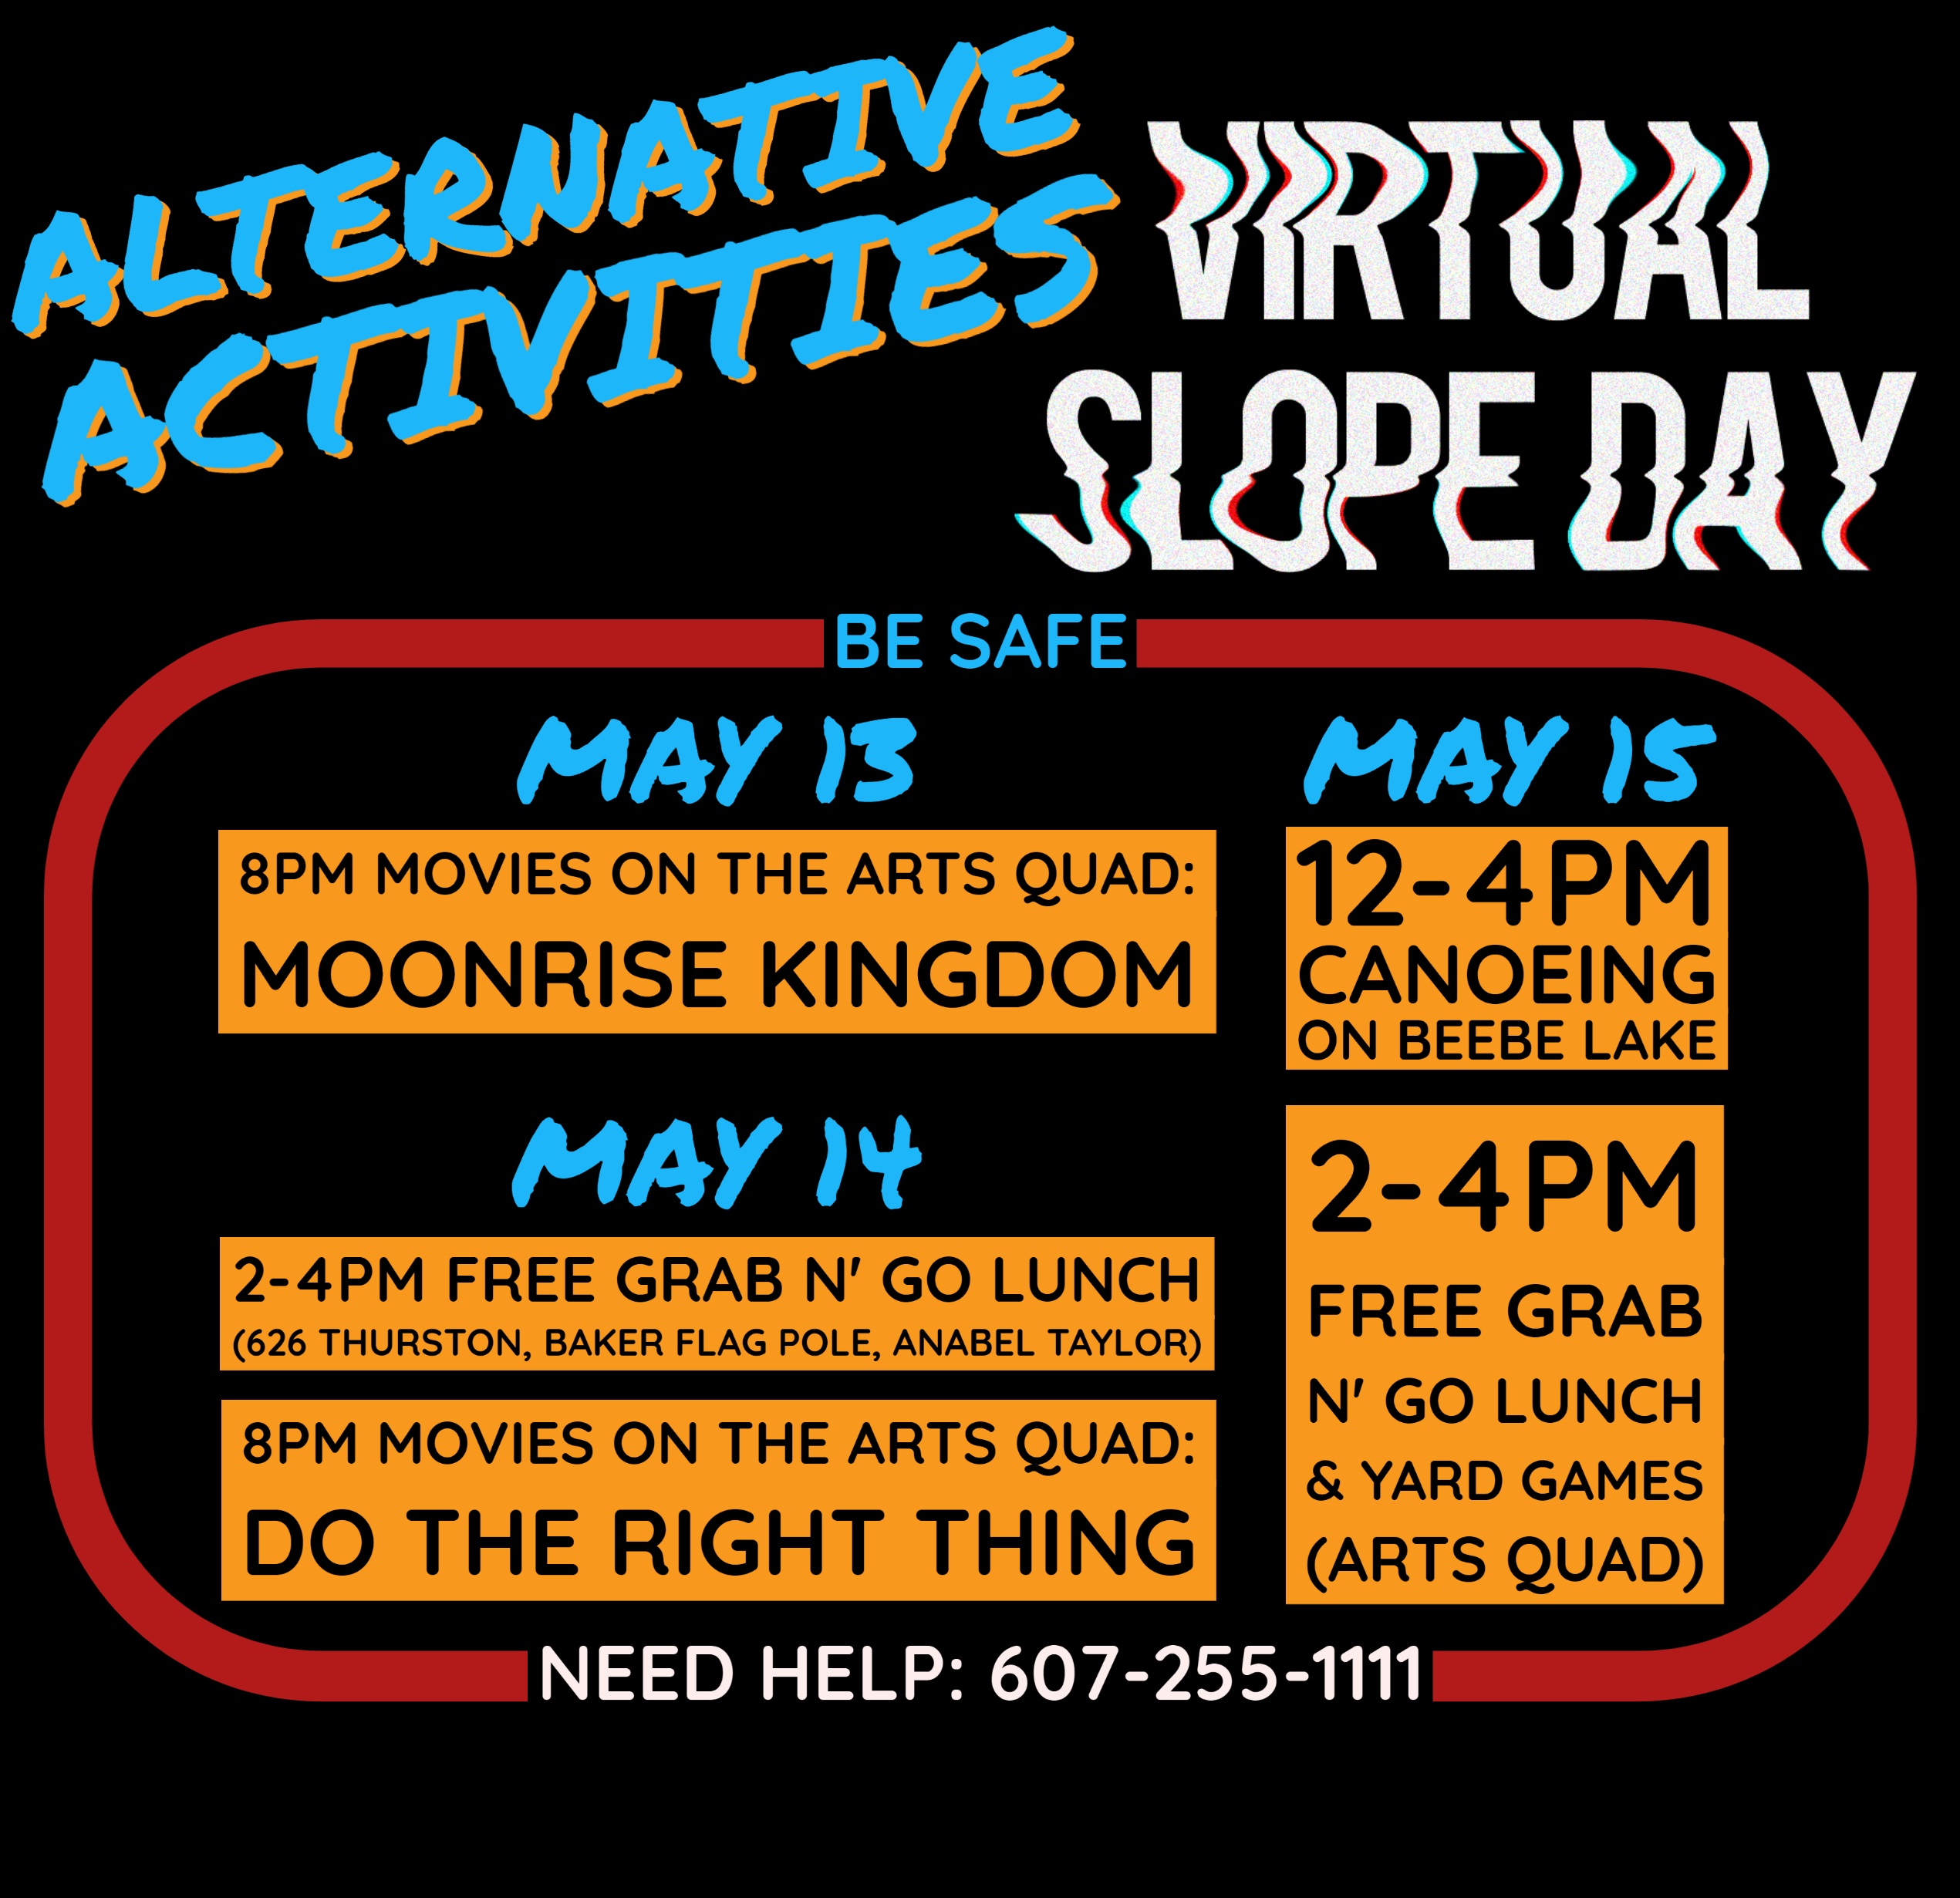 Alter Activities Cornell Virtual Slope Day